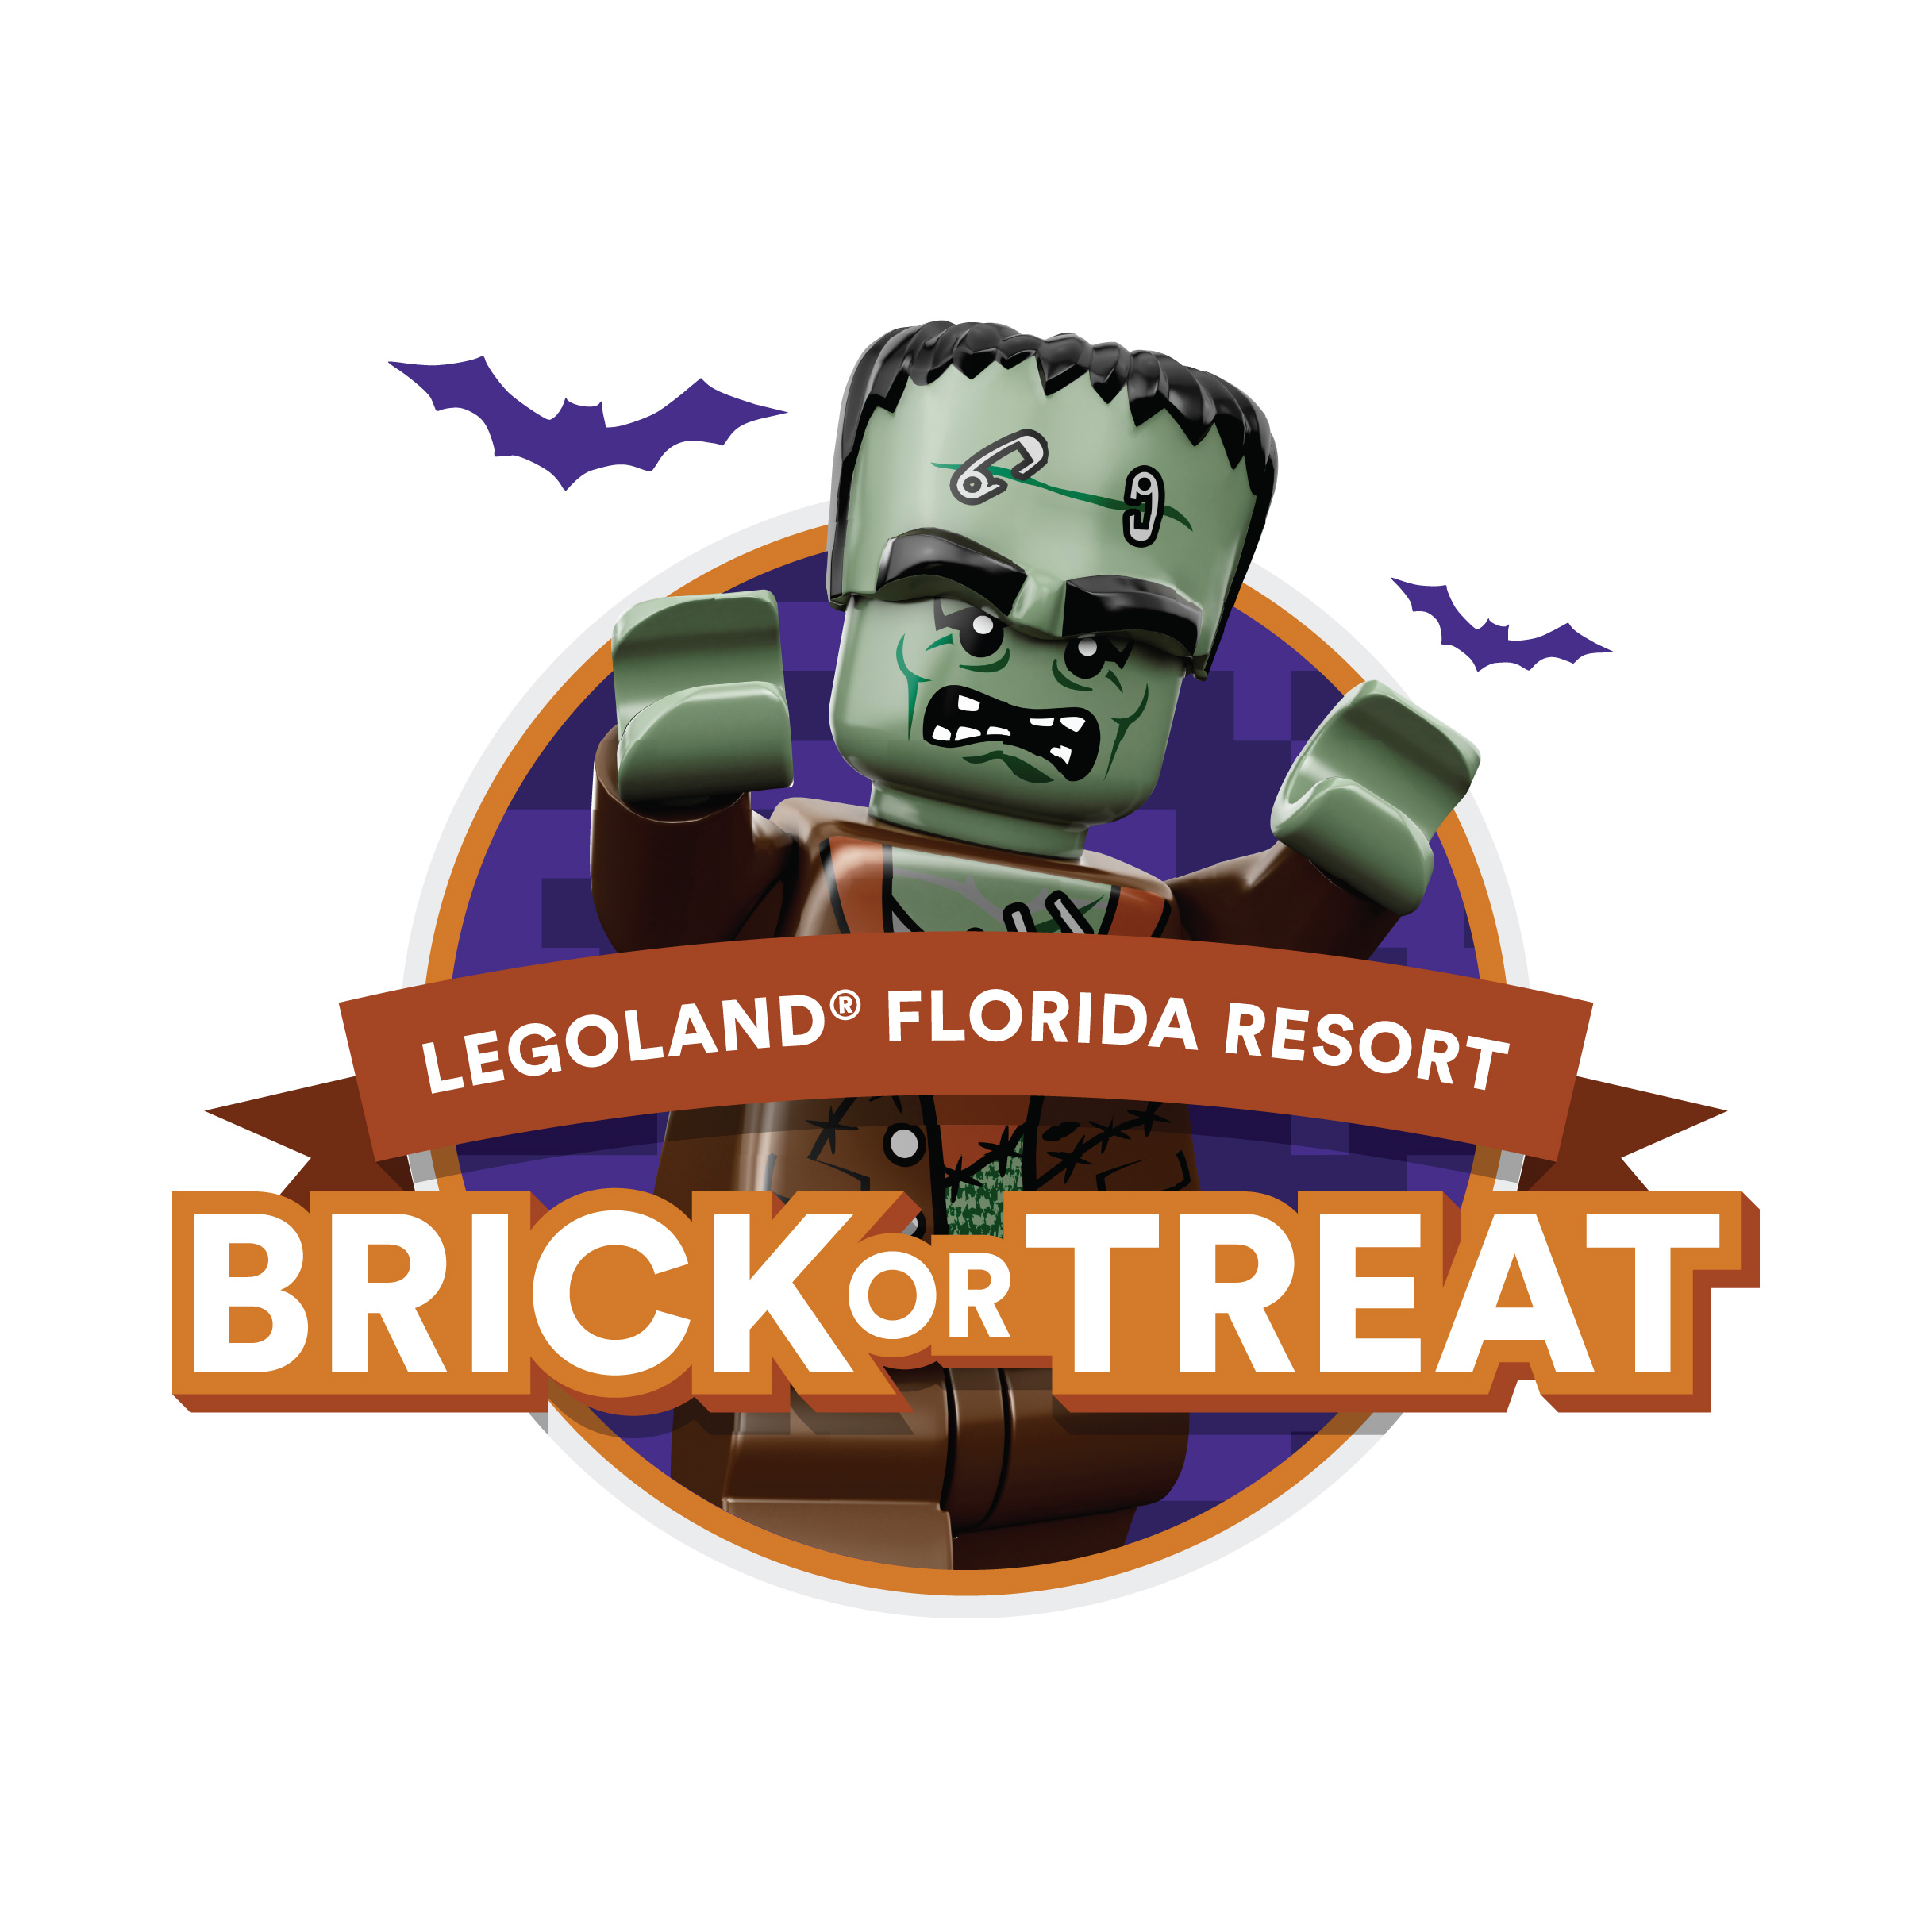 Brick or Treat Returns to LEGOLAND® Florida Resort This October with